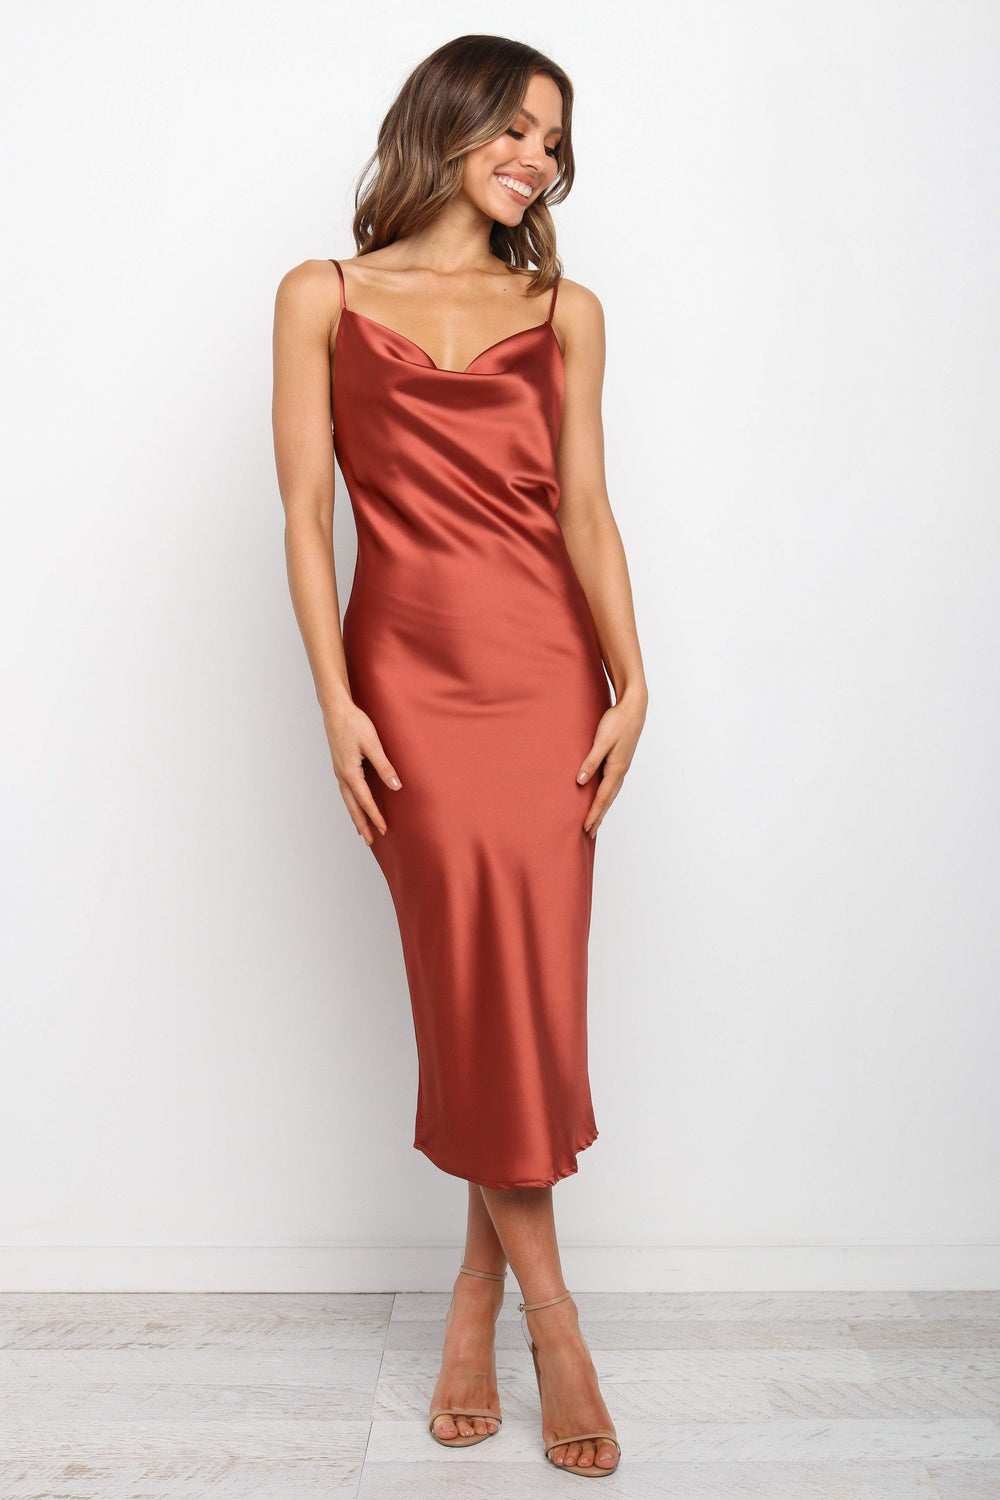 DRESSES Persia Dress - Rust 6 DRESSES Persia Dress - Rust 8 Stunning cowl neck, midi dress with adjustable straps in a sexy satin fabrication. Offering a flattering feminine silhouette that can be dressed up or dressed down. Perfect for weddings, date nights, Spring parties, brunch, day events, and more. 